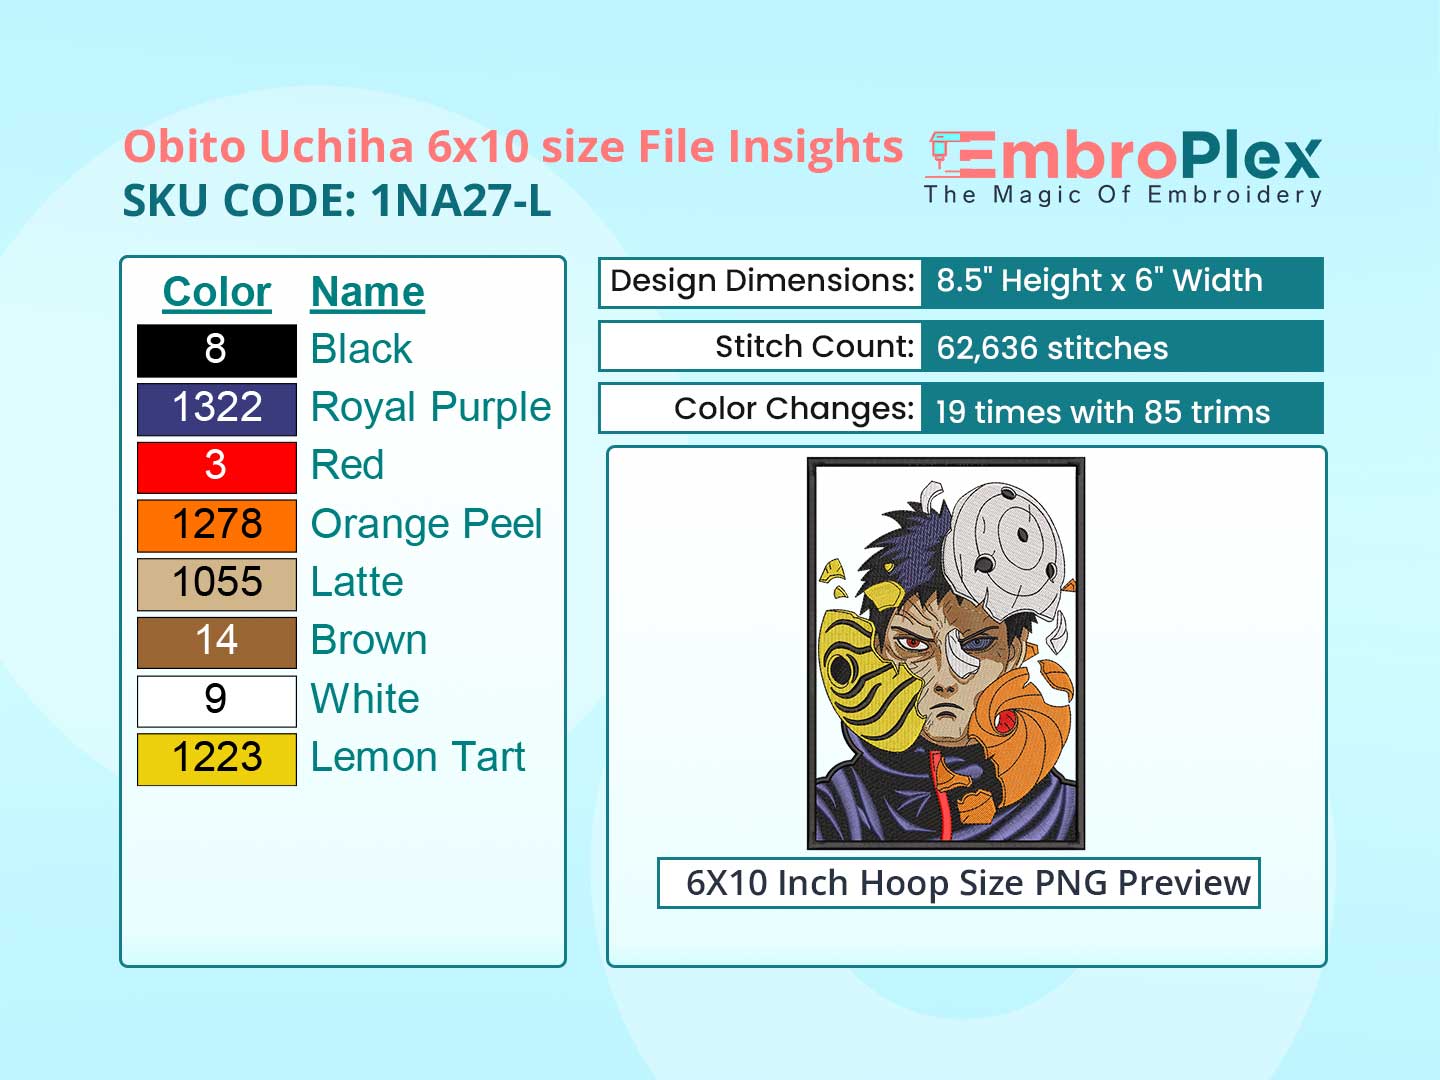 Anime-Inspired Obito Uchiha Embroidery Design File - 6x10 Inch hoop Size Variation overview image